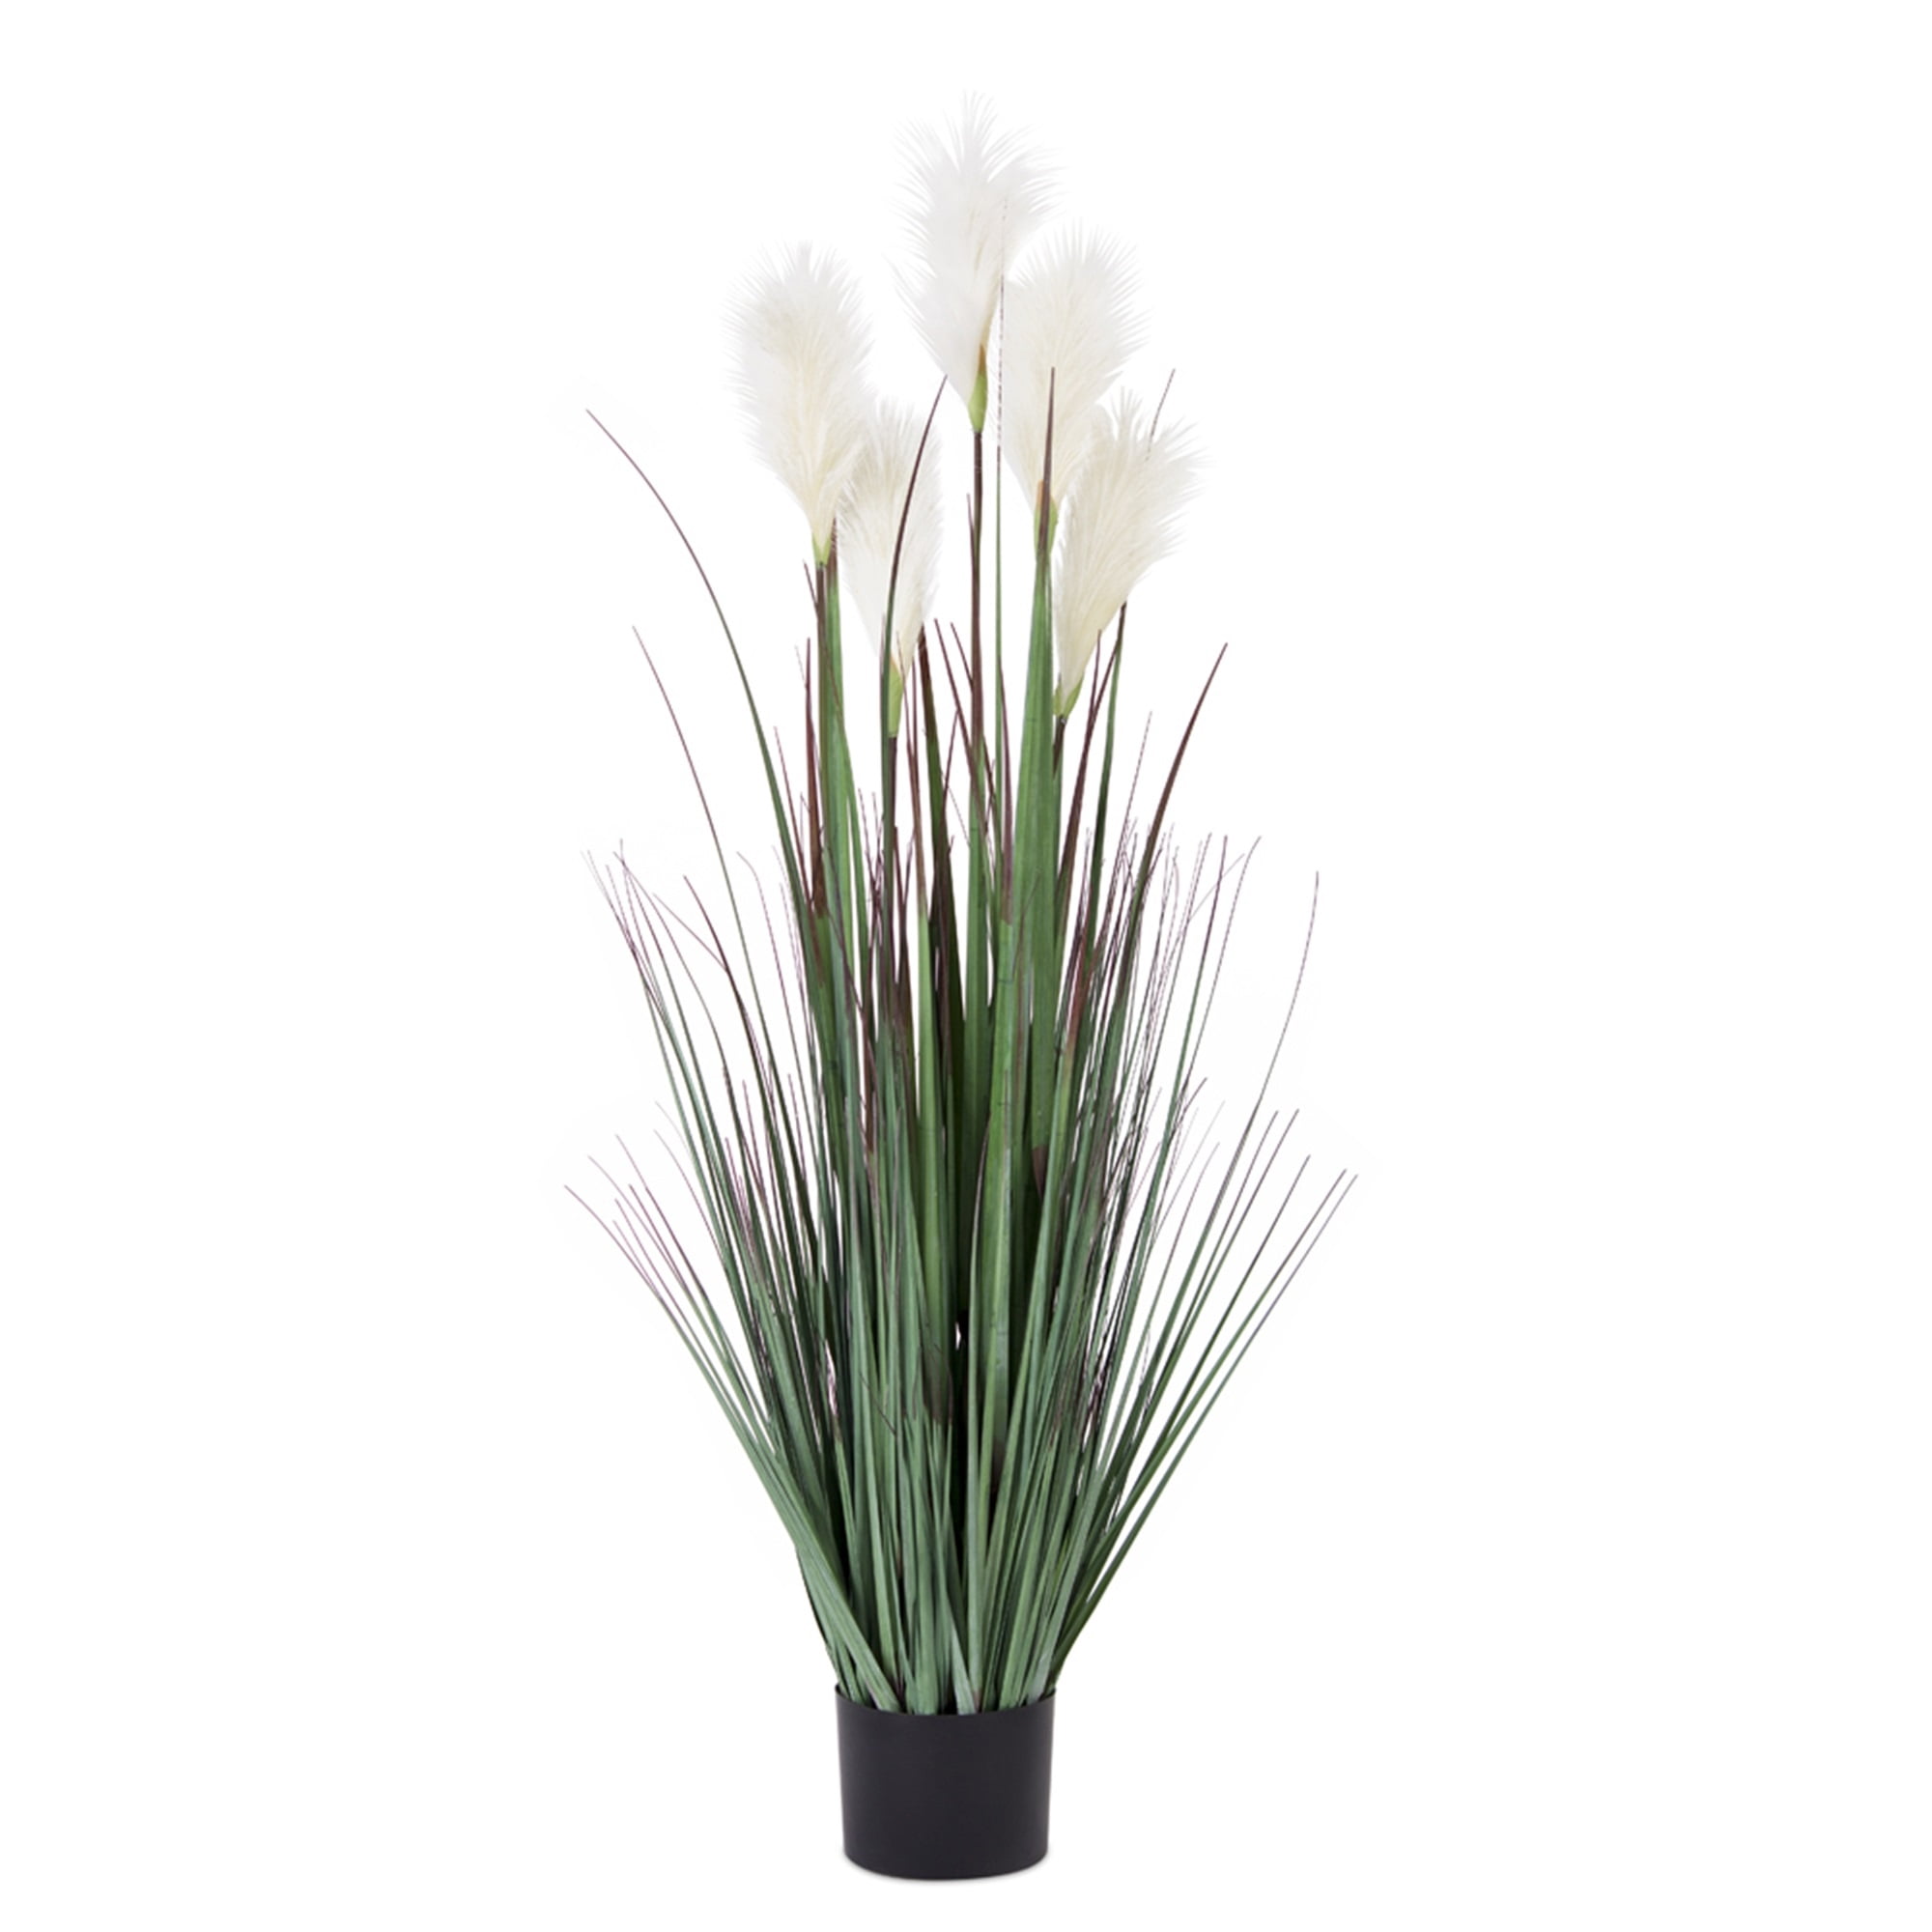 Potted Grass/Foxtail (Set of 2) 48"H PVC/Plastic